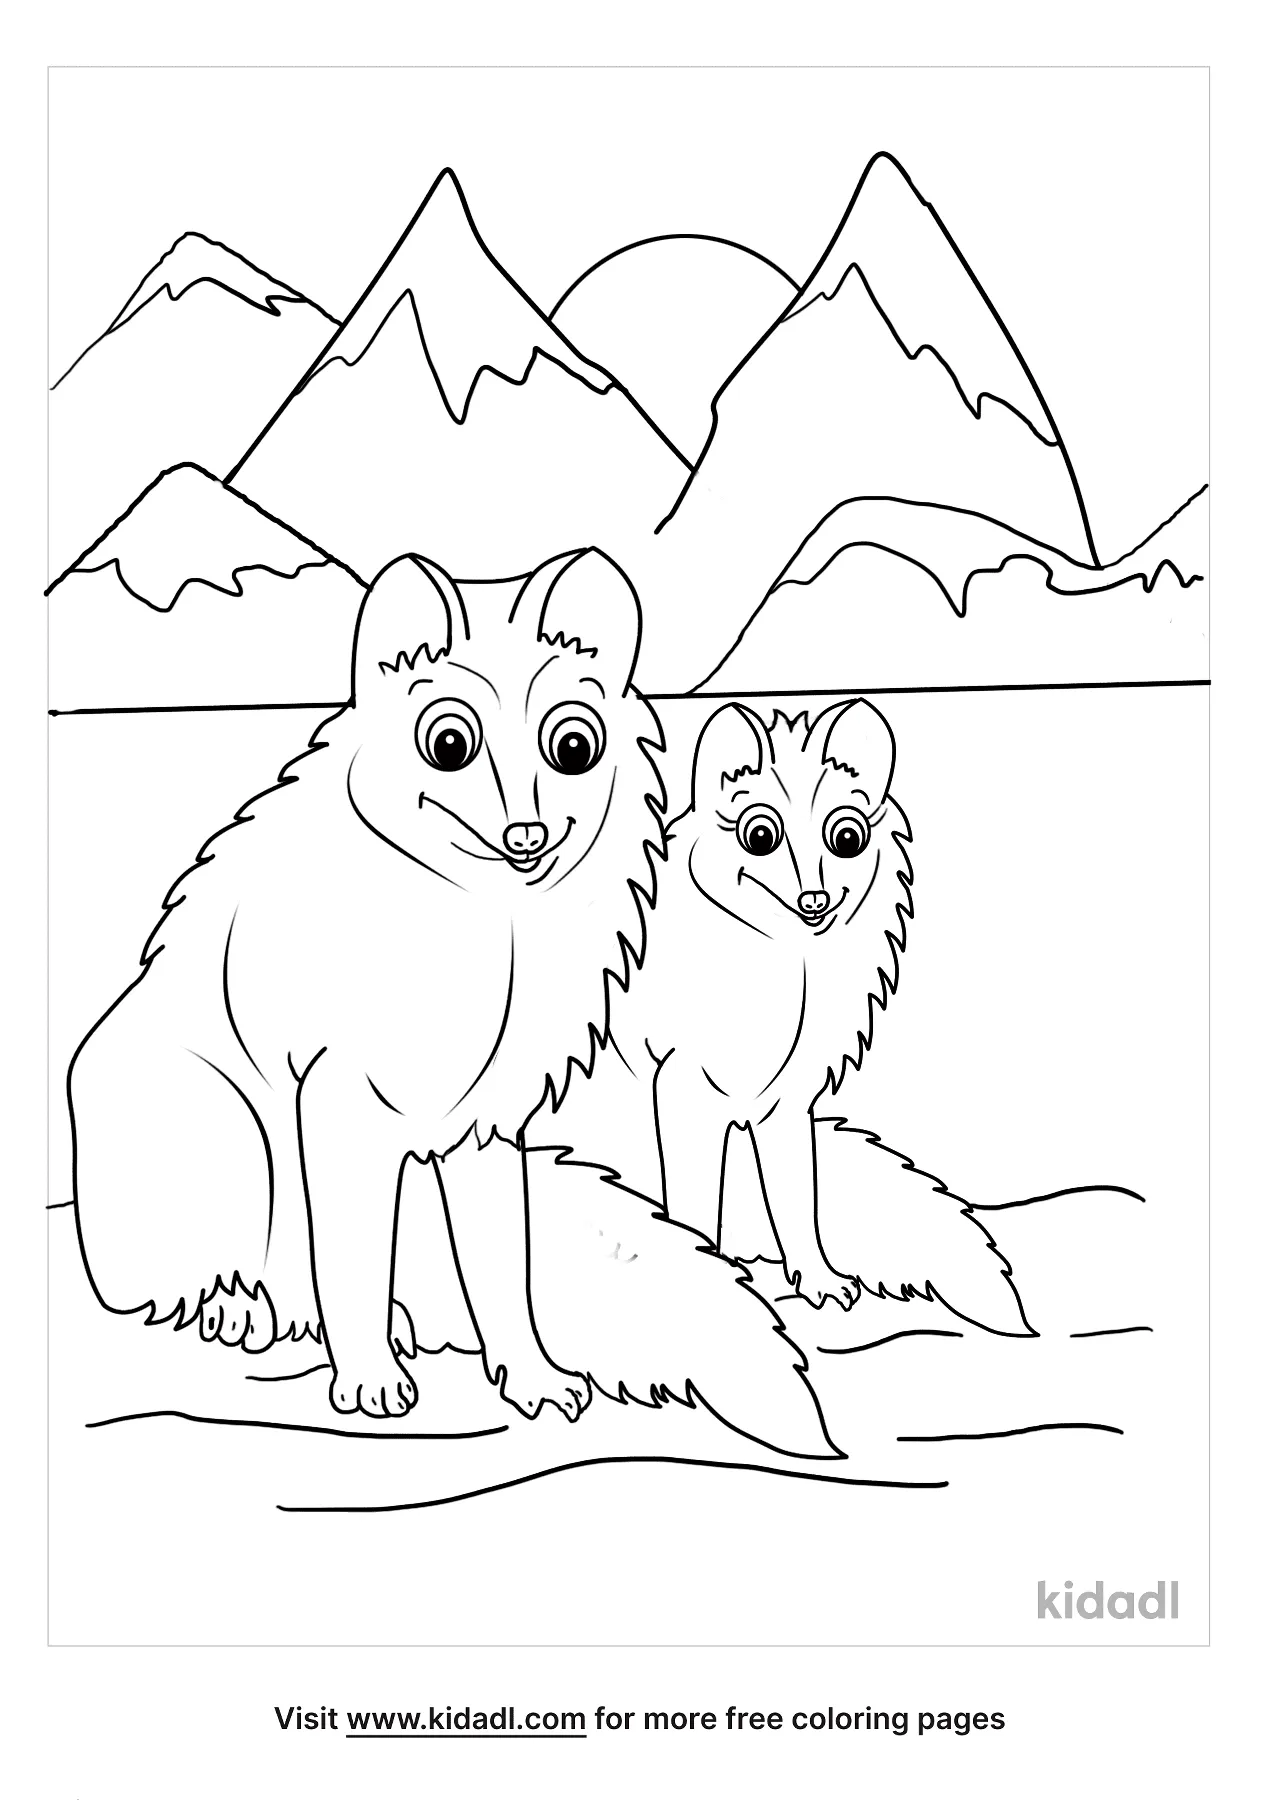 Arctic Fox Coloring Pages   Free Animals Coloring Pages   Kidadl